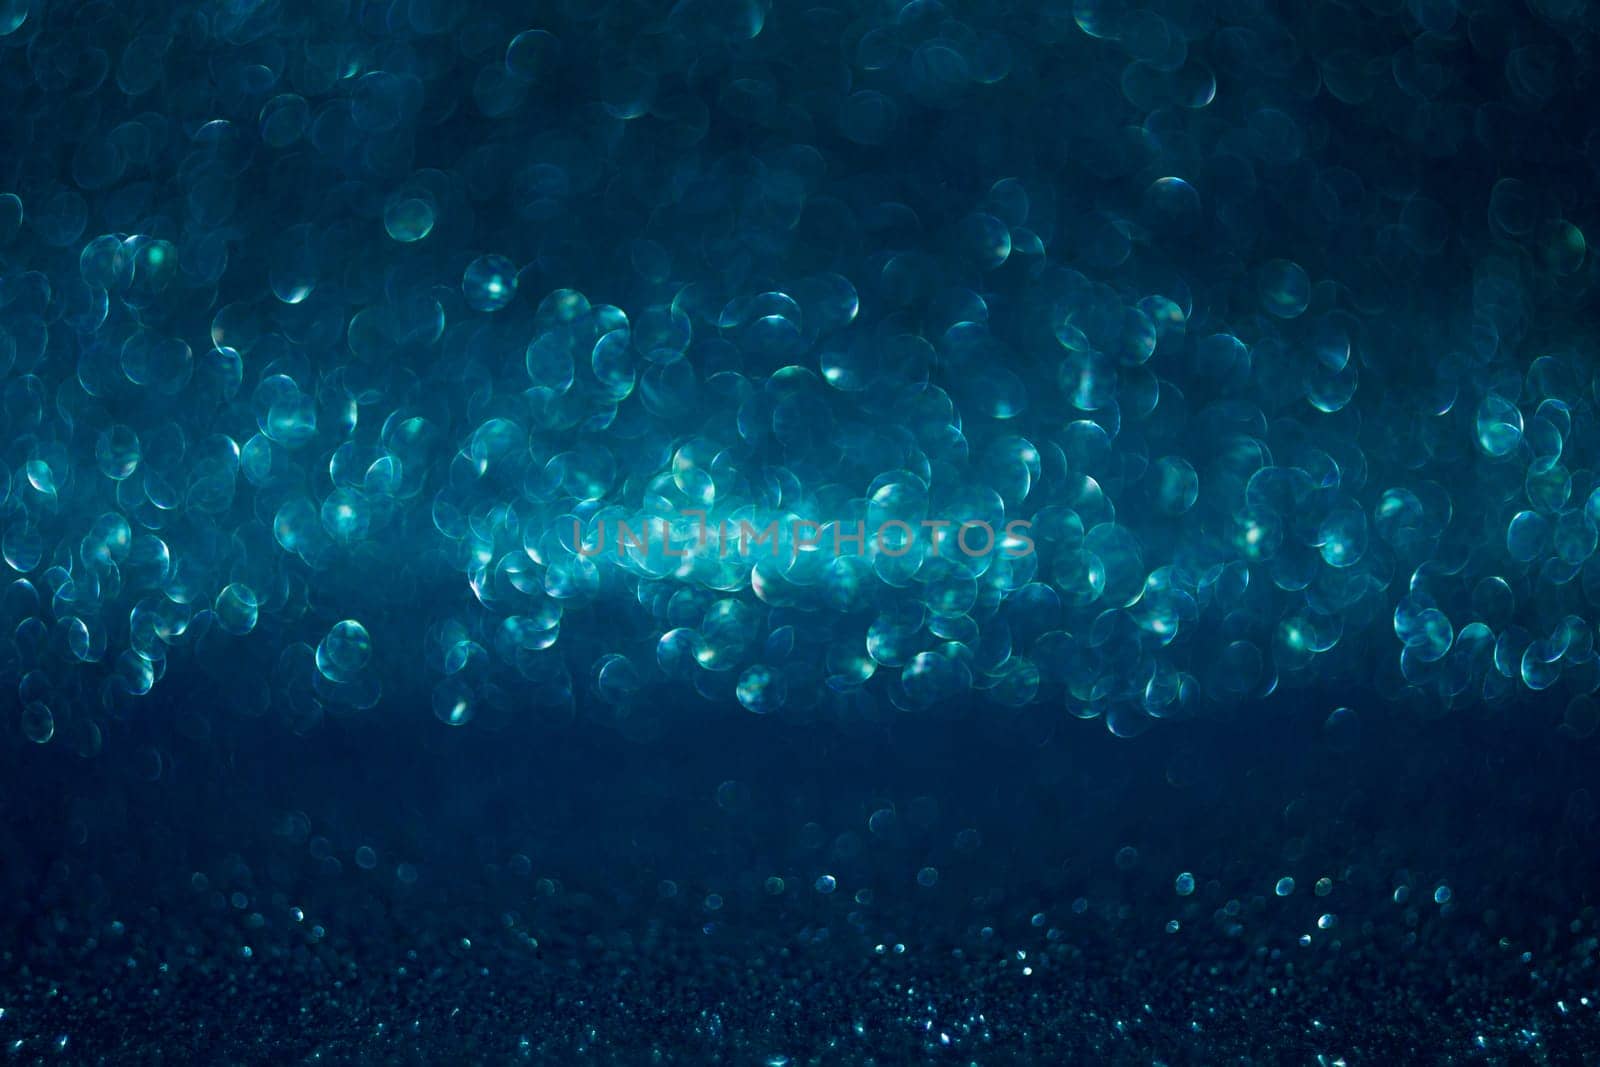 The image is a blue background with many small, round, and blurry dots. The dots are scattered throughout the image, creating a sense of movement and depth